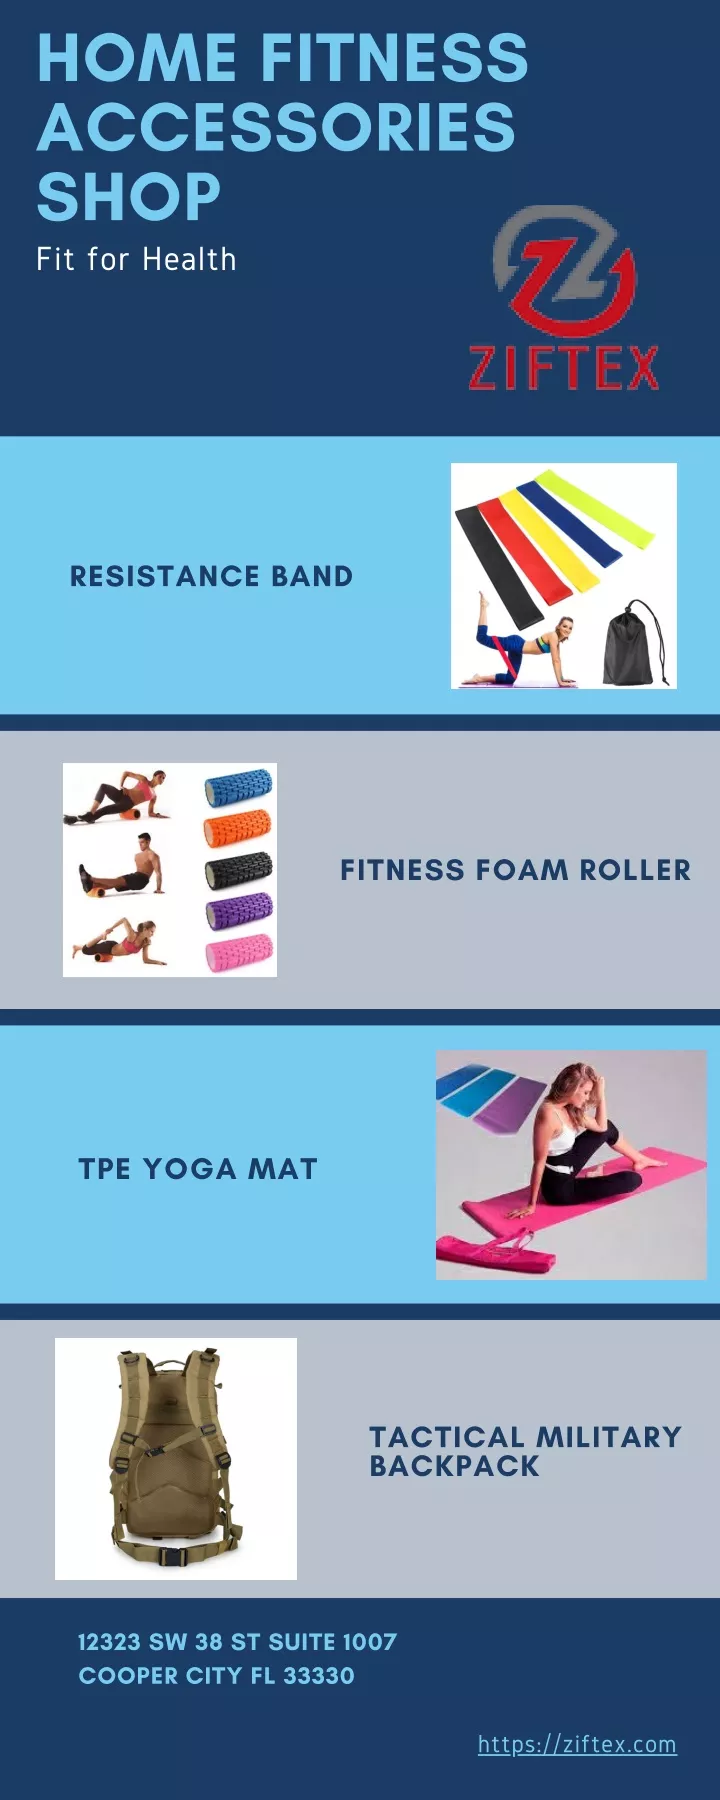 home fitness accessories shop